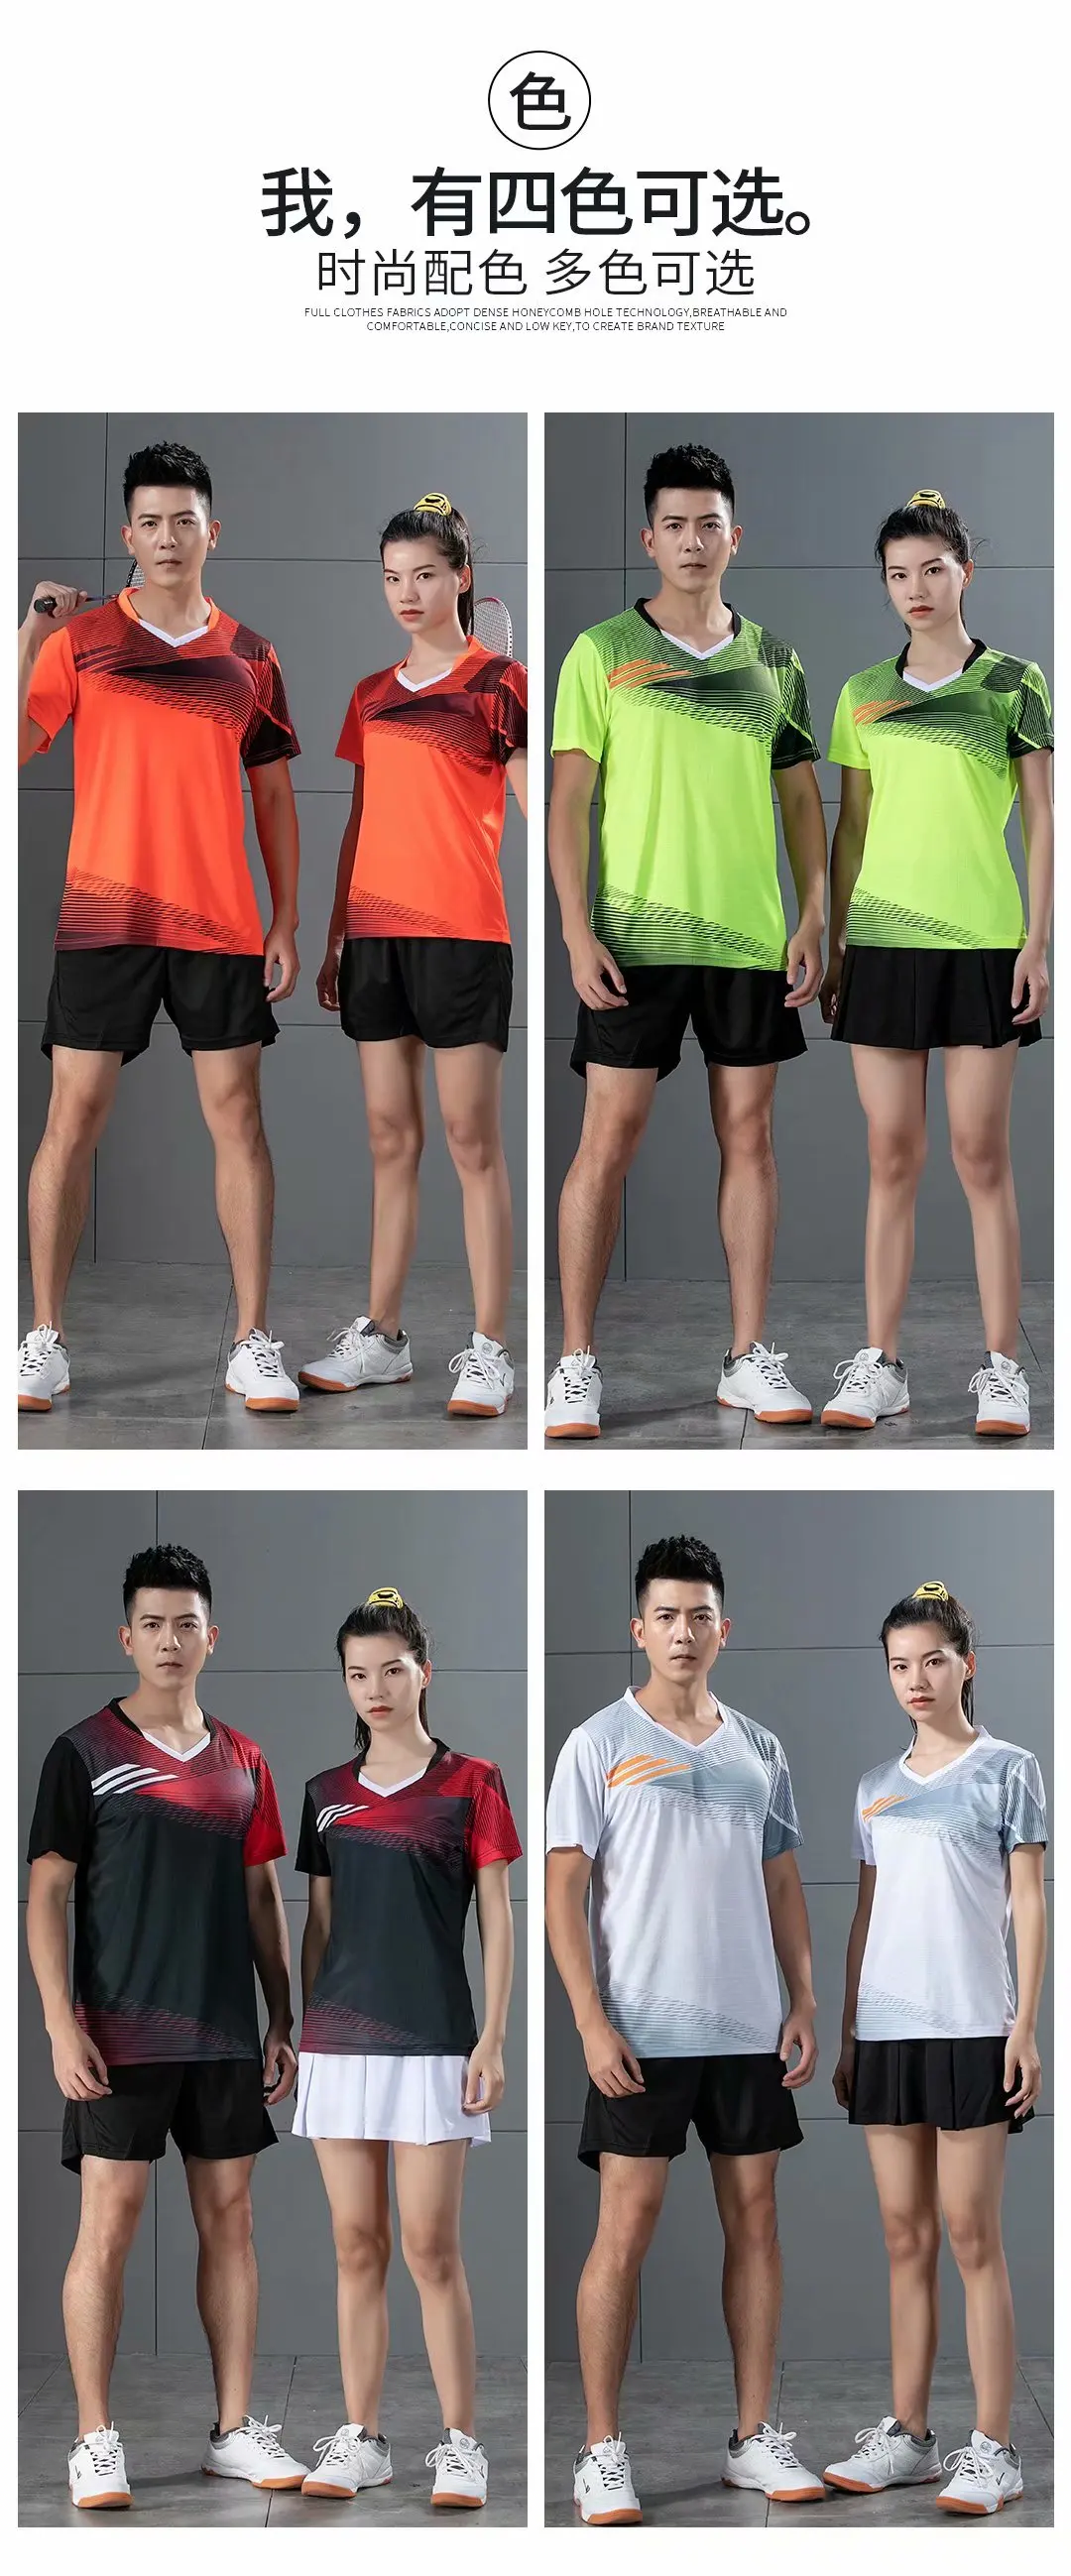 

2021New Couples Badminton T-Shirt Suit V-neck Polyester Quick Dry Tennis Volleyball Training Wear Jogging Sportswear